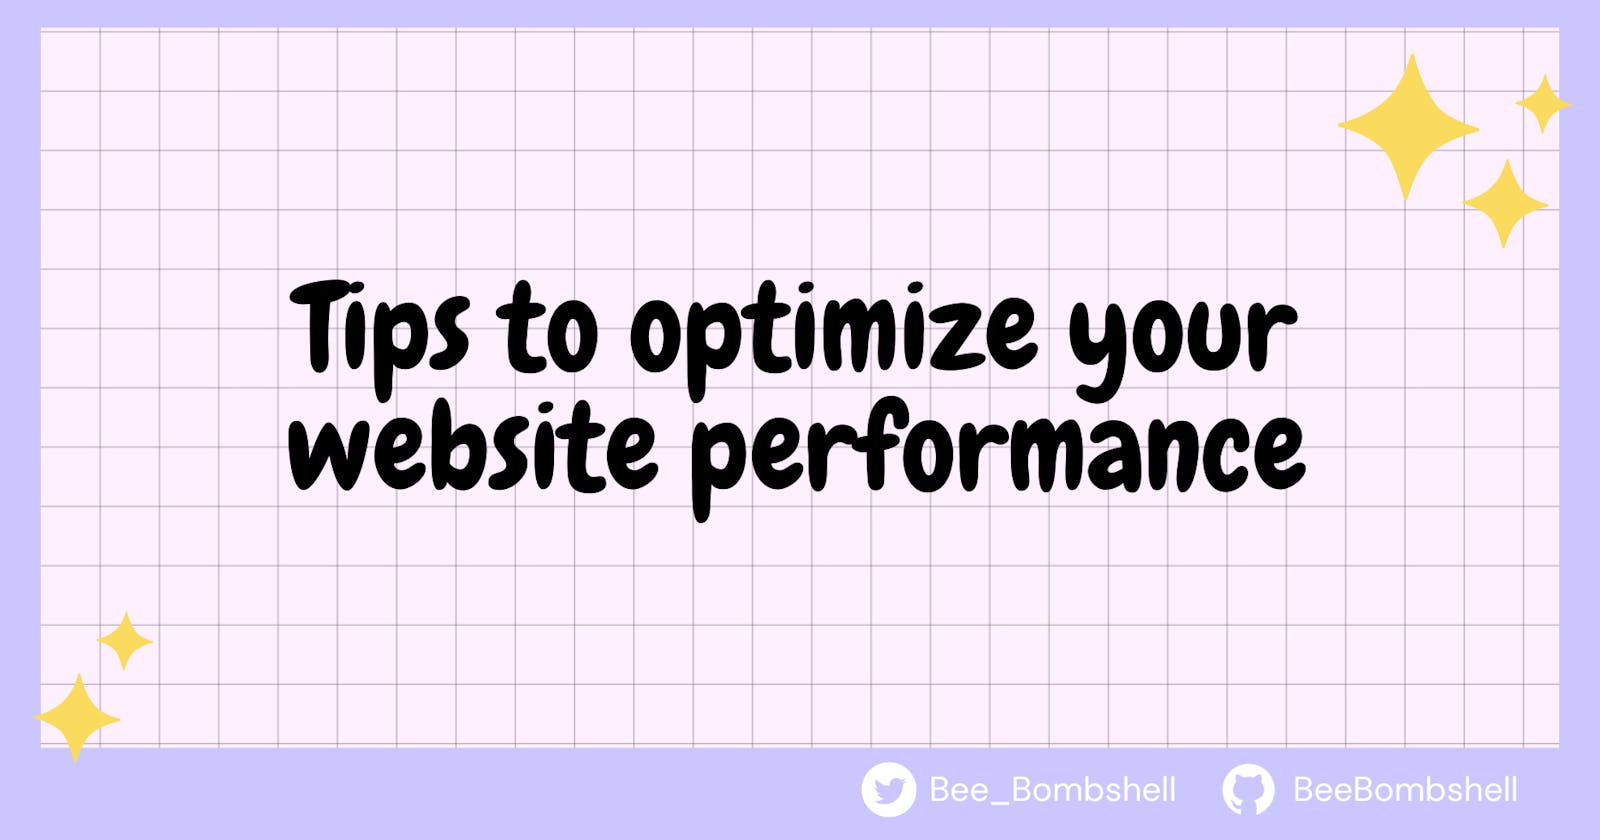 Tips for improving your website performance ✨